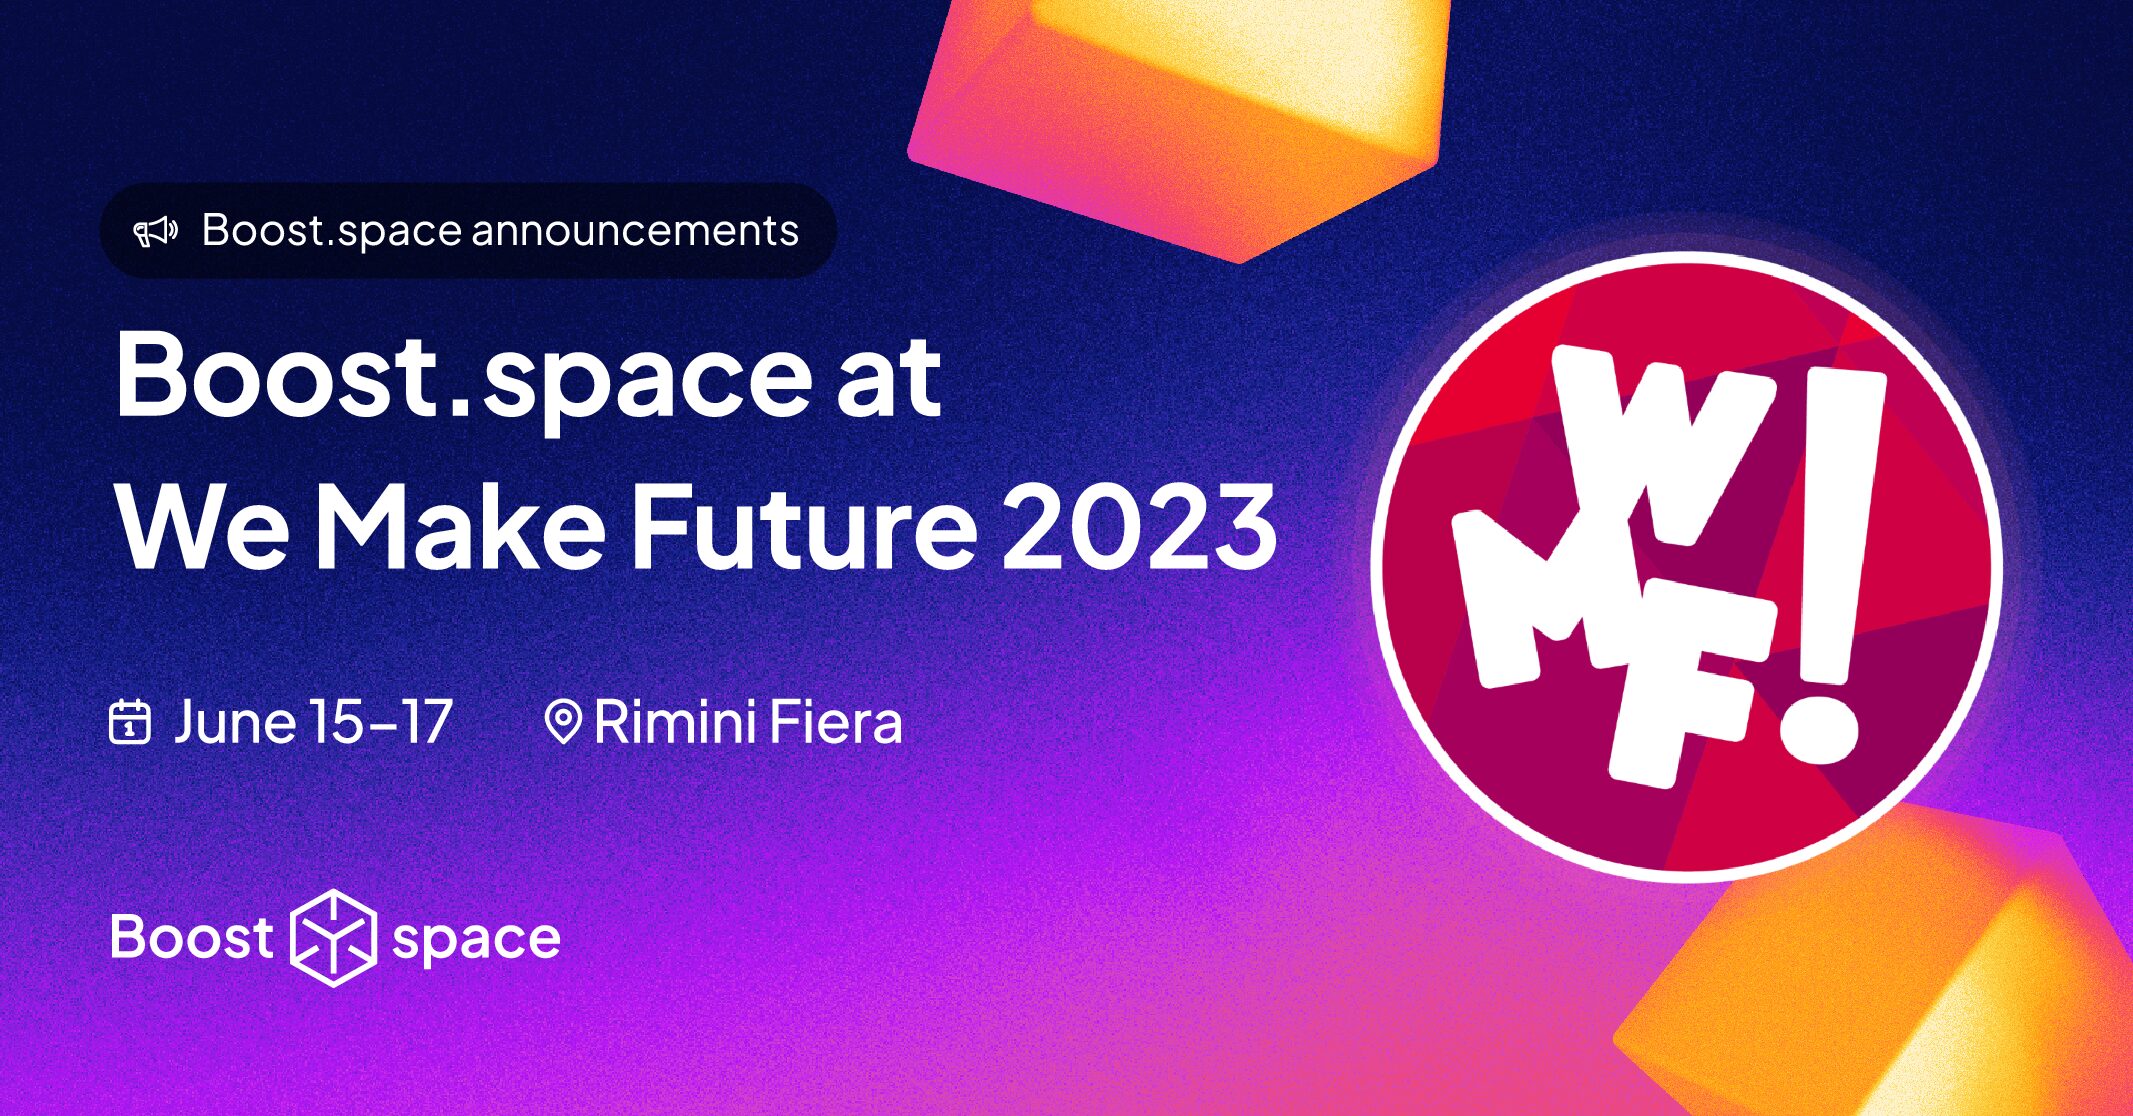 Boost.space took part in We Make Future Trade Fair and Festival on Tech and Digital Innovation in Rimini